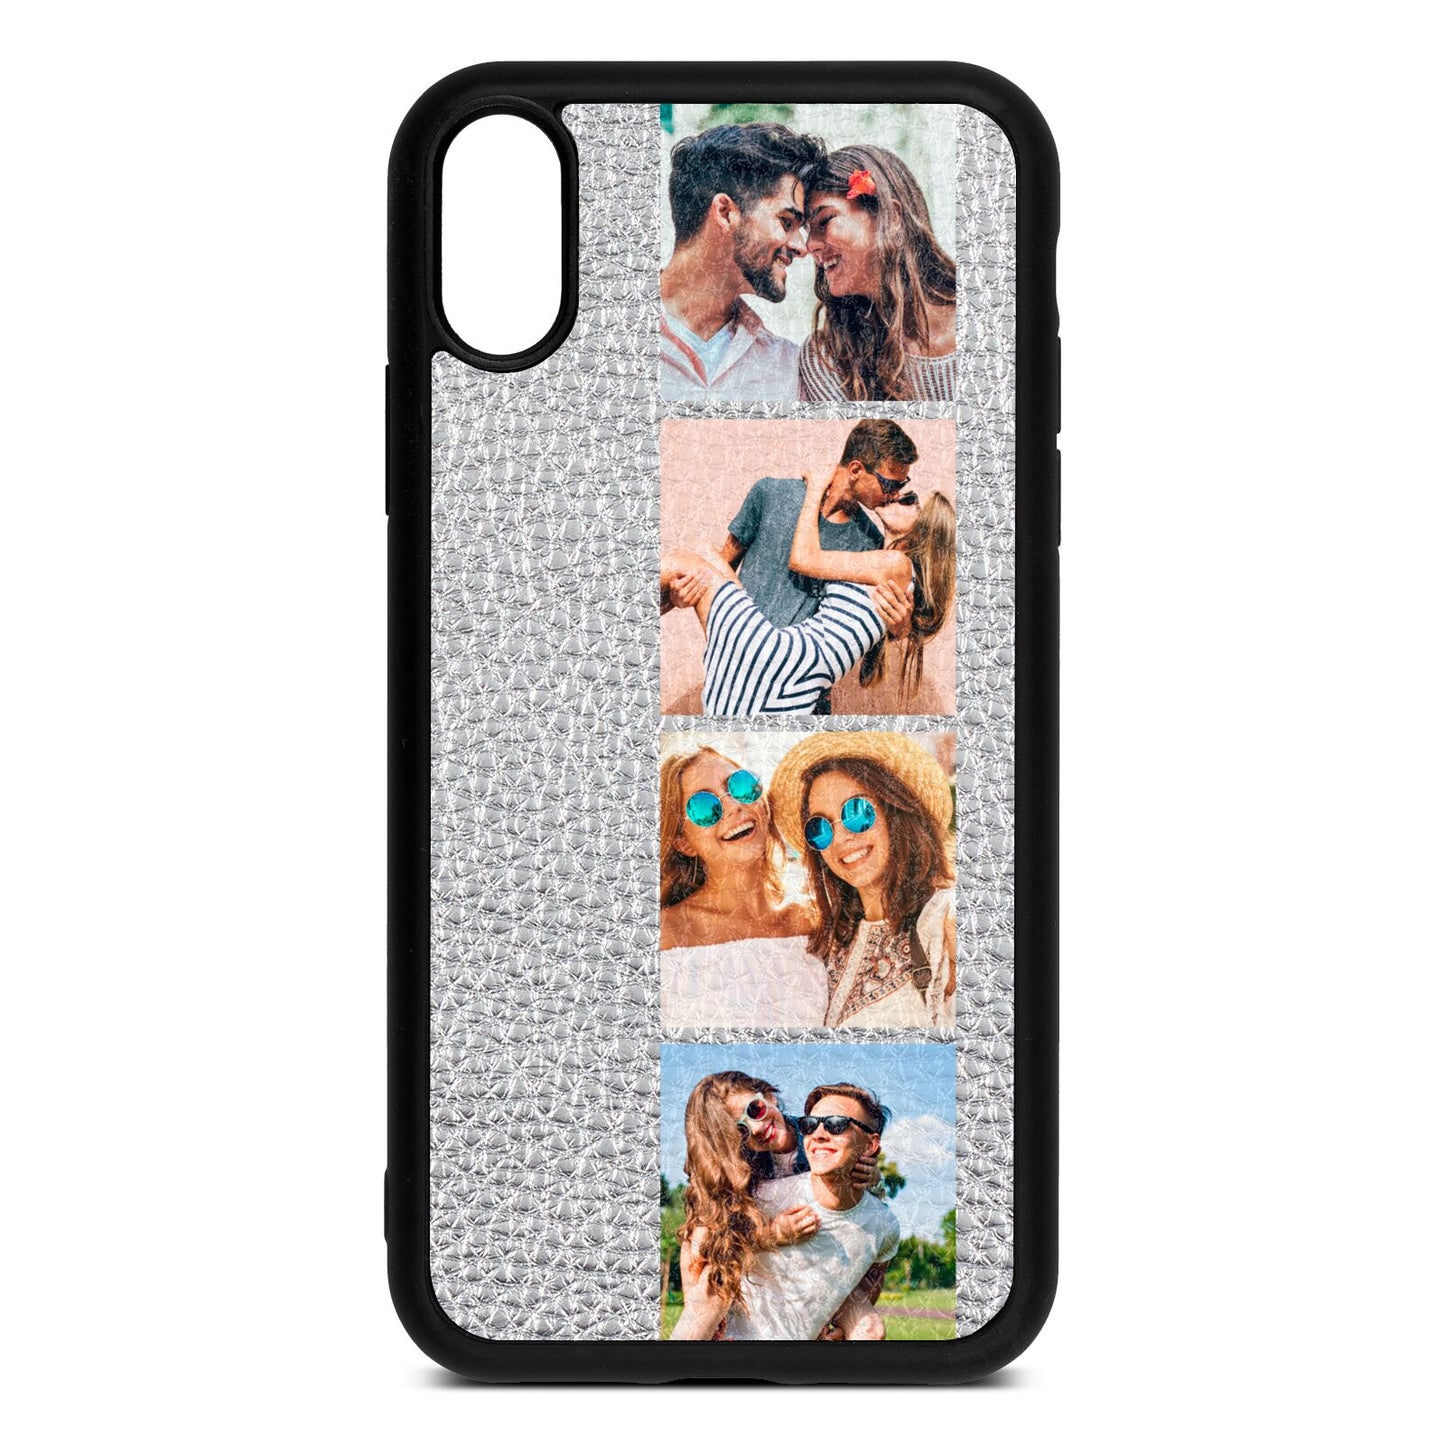 Photo Strip Montage Upload Silver Pebble Leather iPhone Xr Case